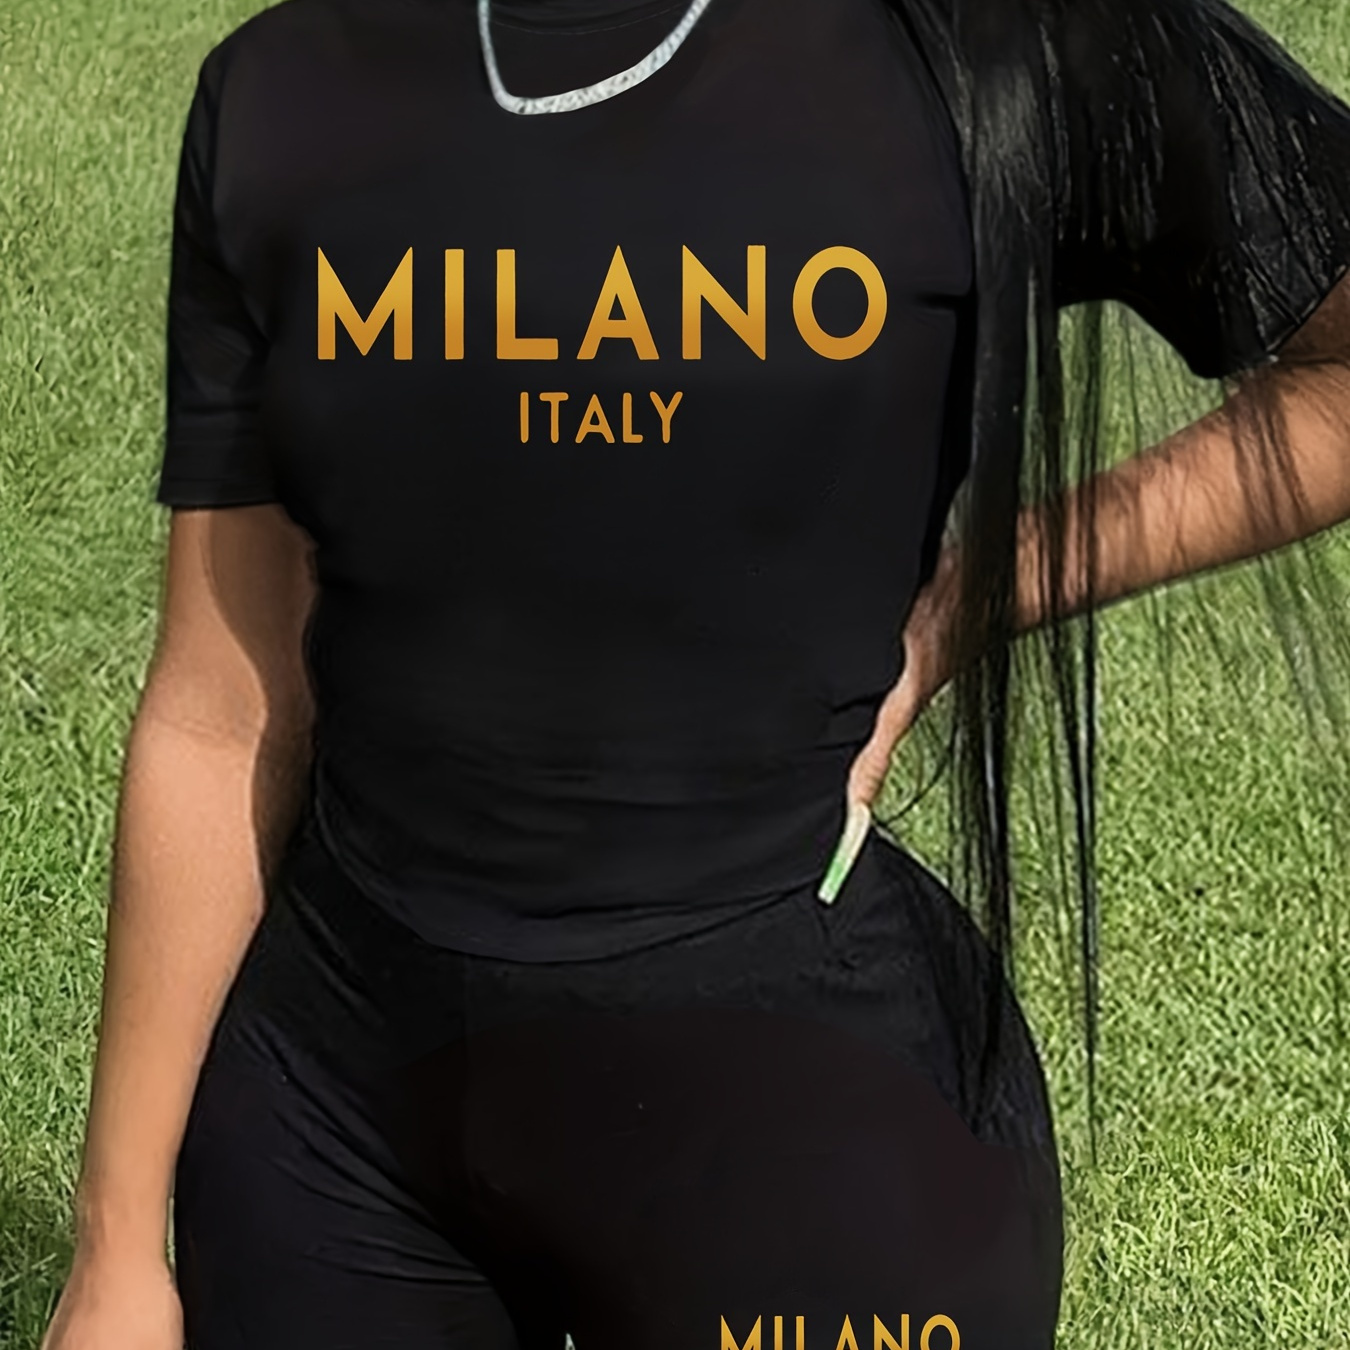 

Milano Print Casual Shorts Set, Crew Neck Short Sleeve Top & Shorts Outfits For Spring & Summer, Women's Clothing